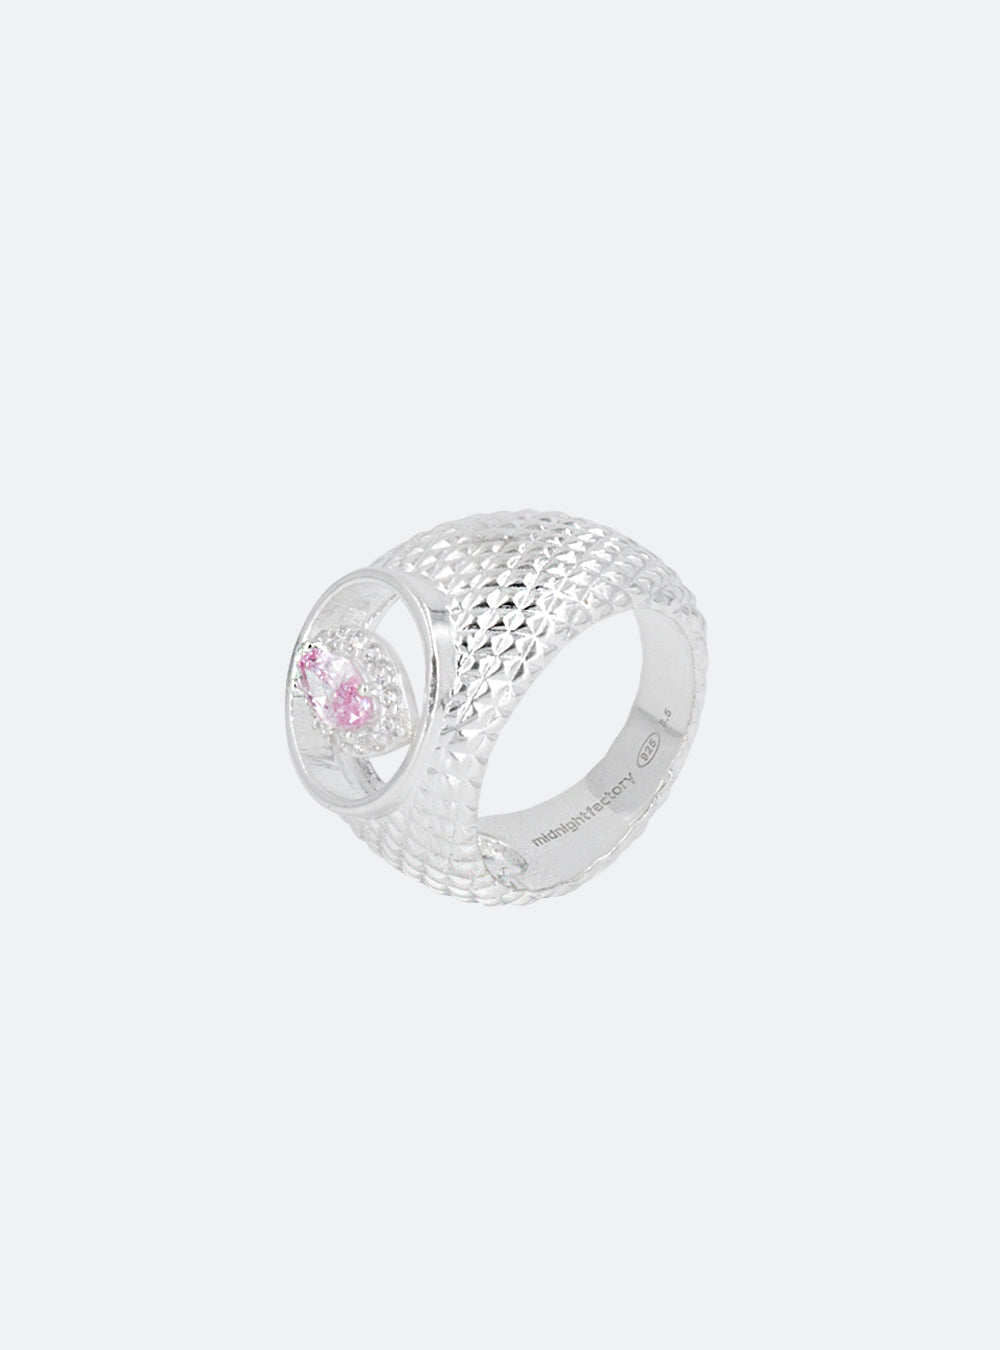 A MIDNIGHTFACTORY Cat-eye cutout cocktail signet ring with a pink stone on a white background.